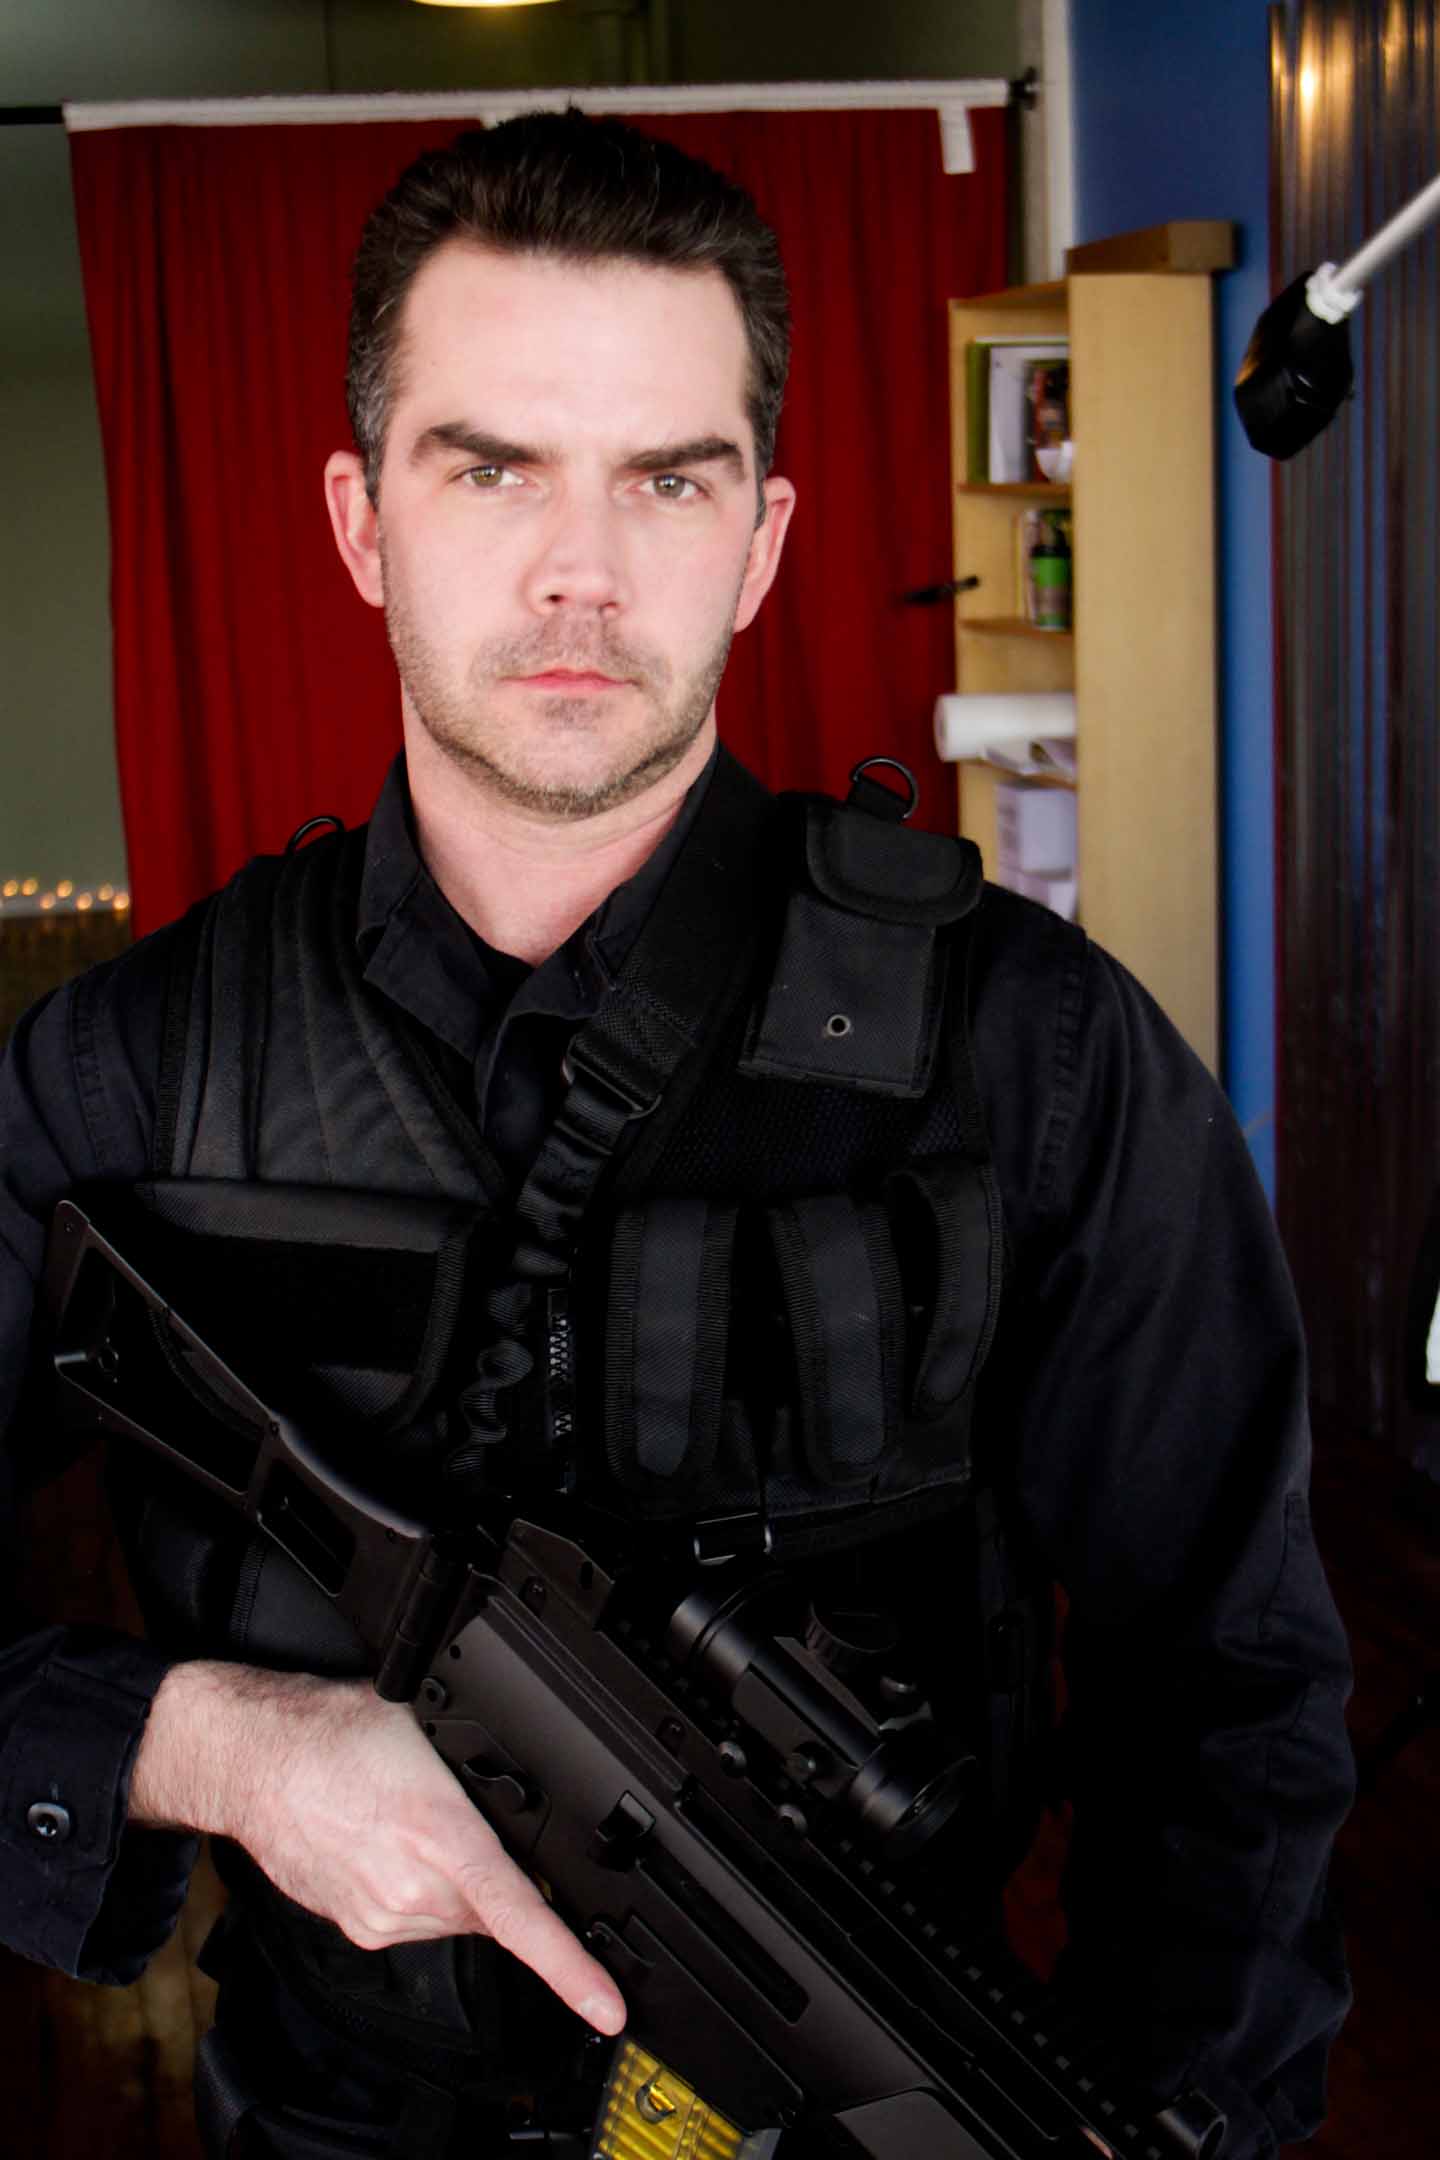 SWAT Photo from Police Training for Actors with John Patrick Barry in Baltimore, MD at Studio Boh